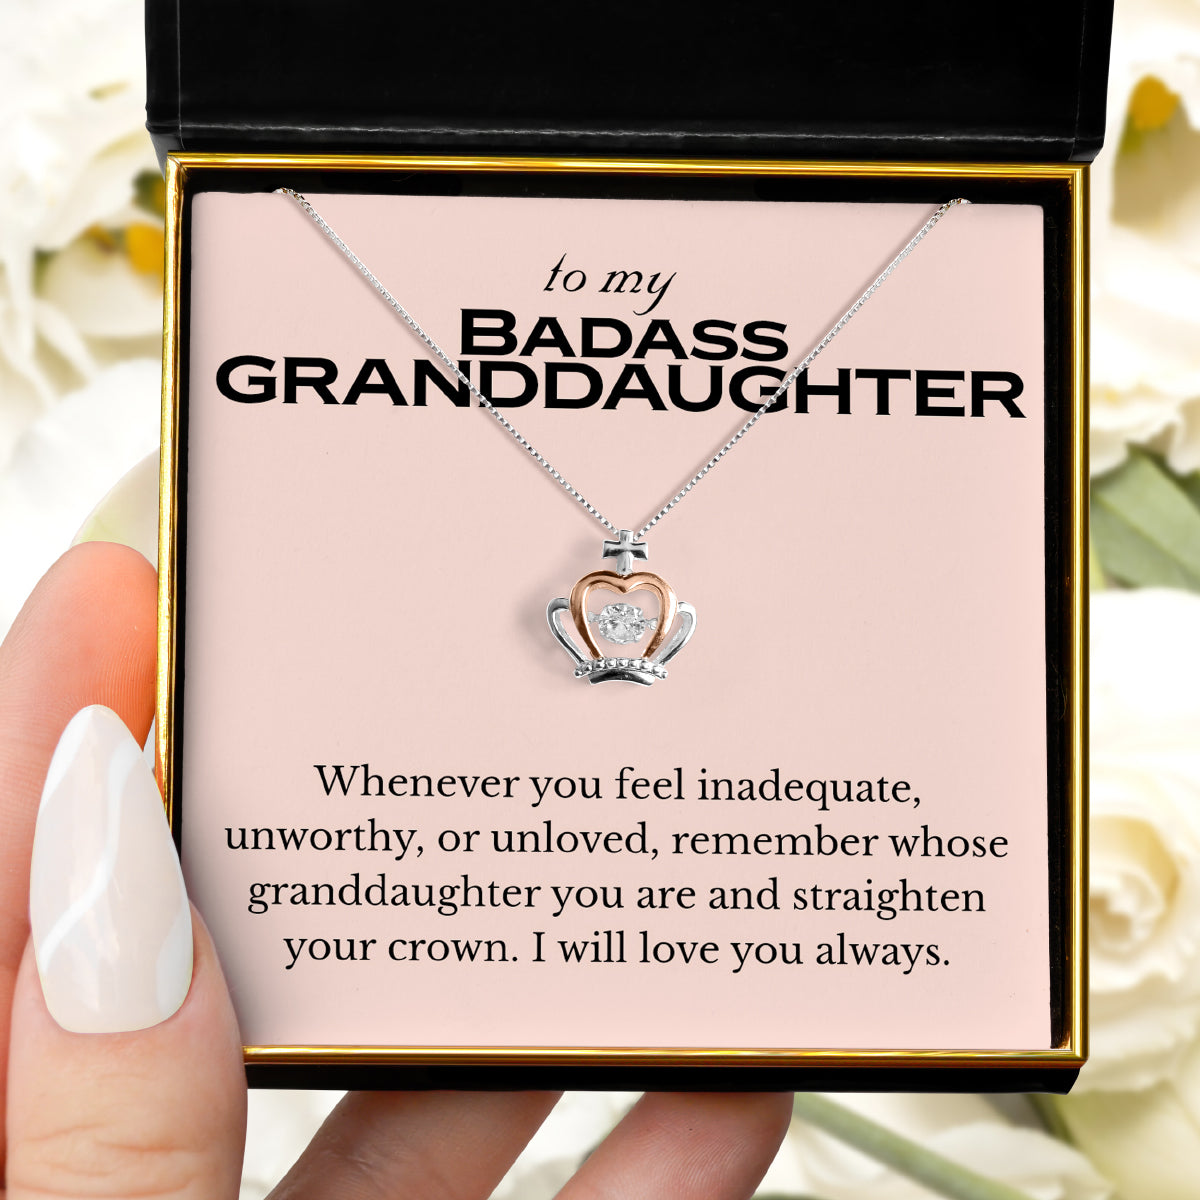 To My Badass Granddaughter (Pink Edition) - Luxe Crown Necklace Gift Set